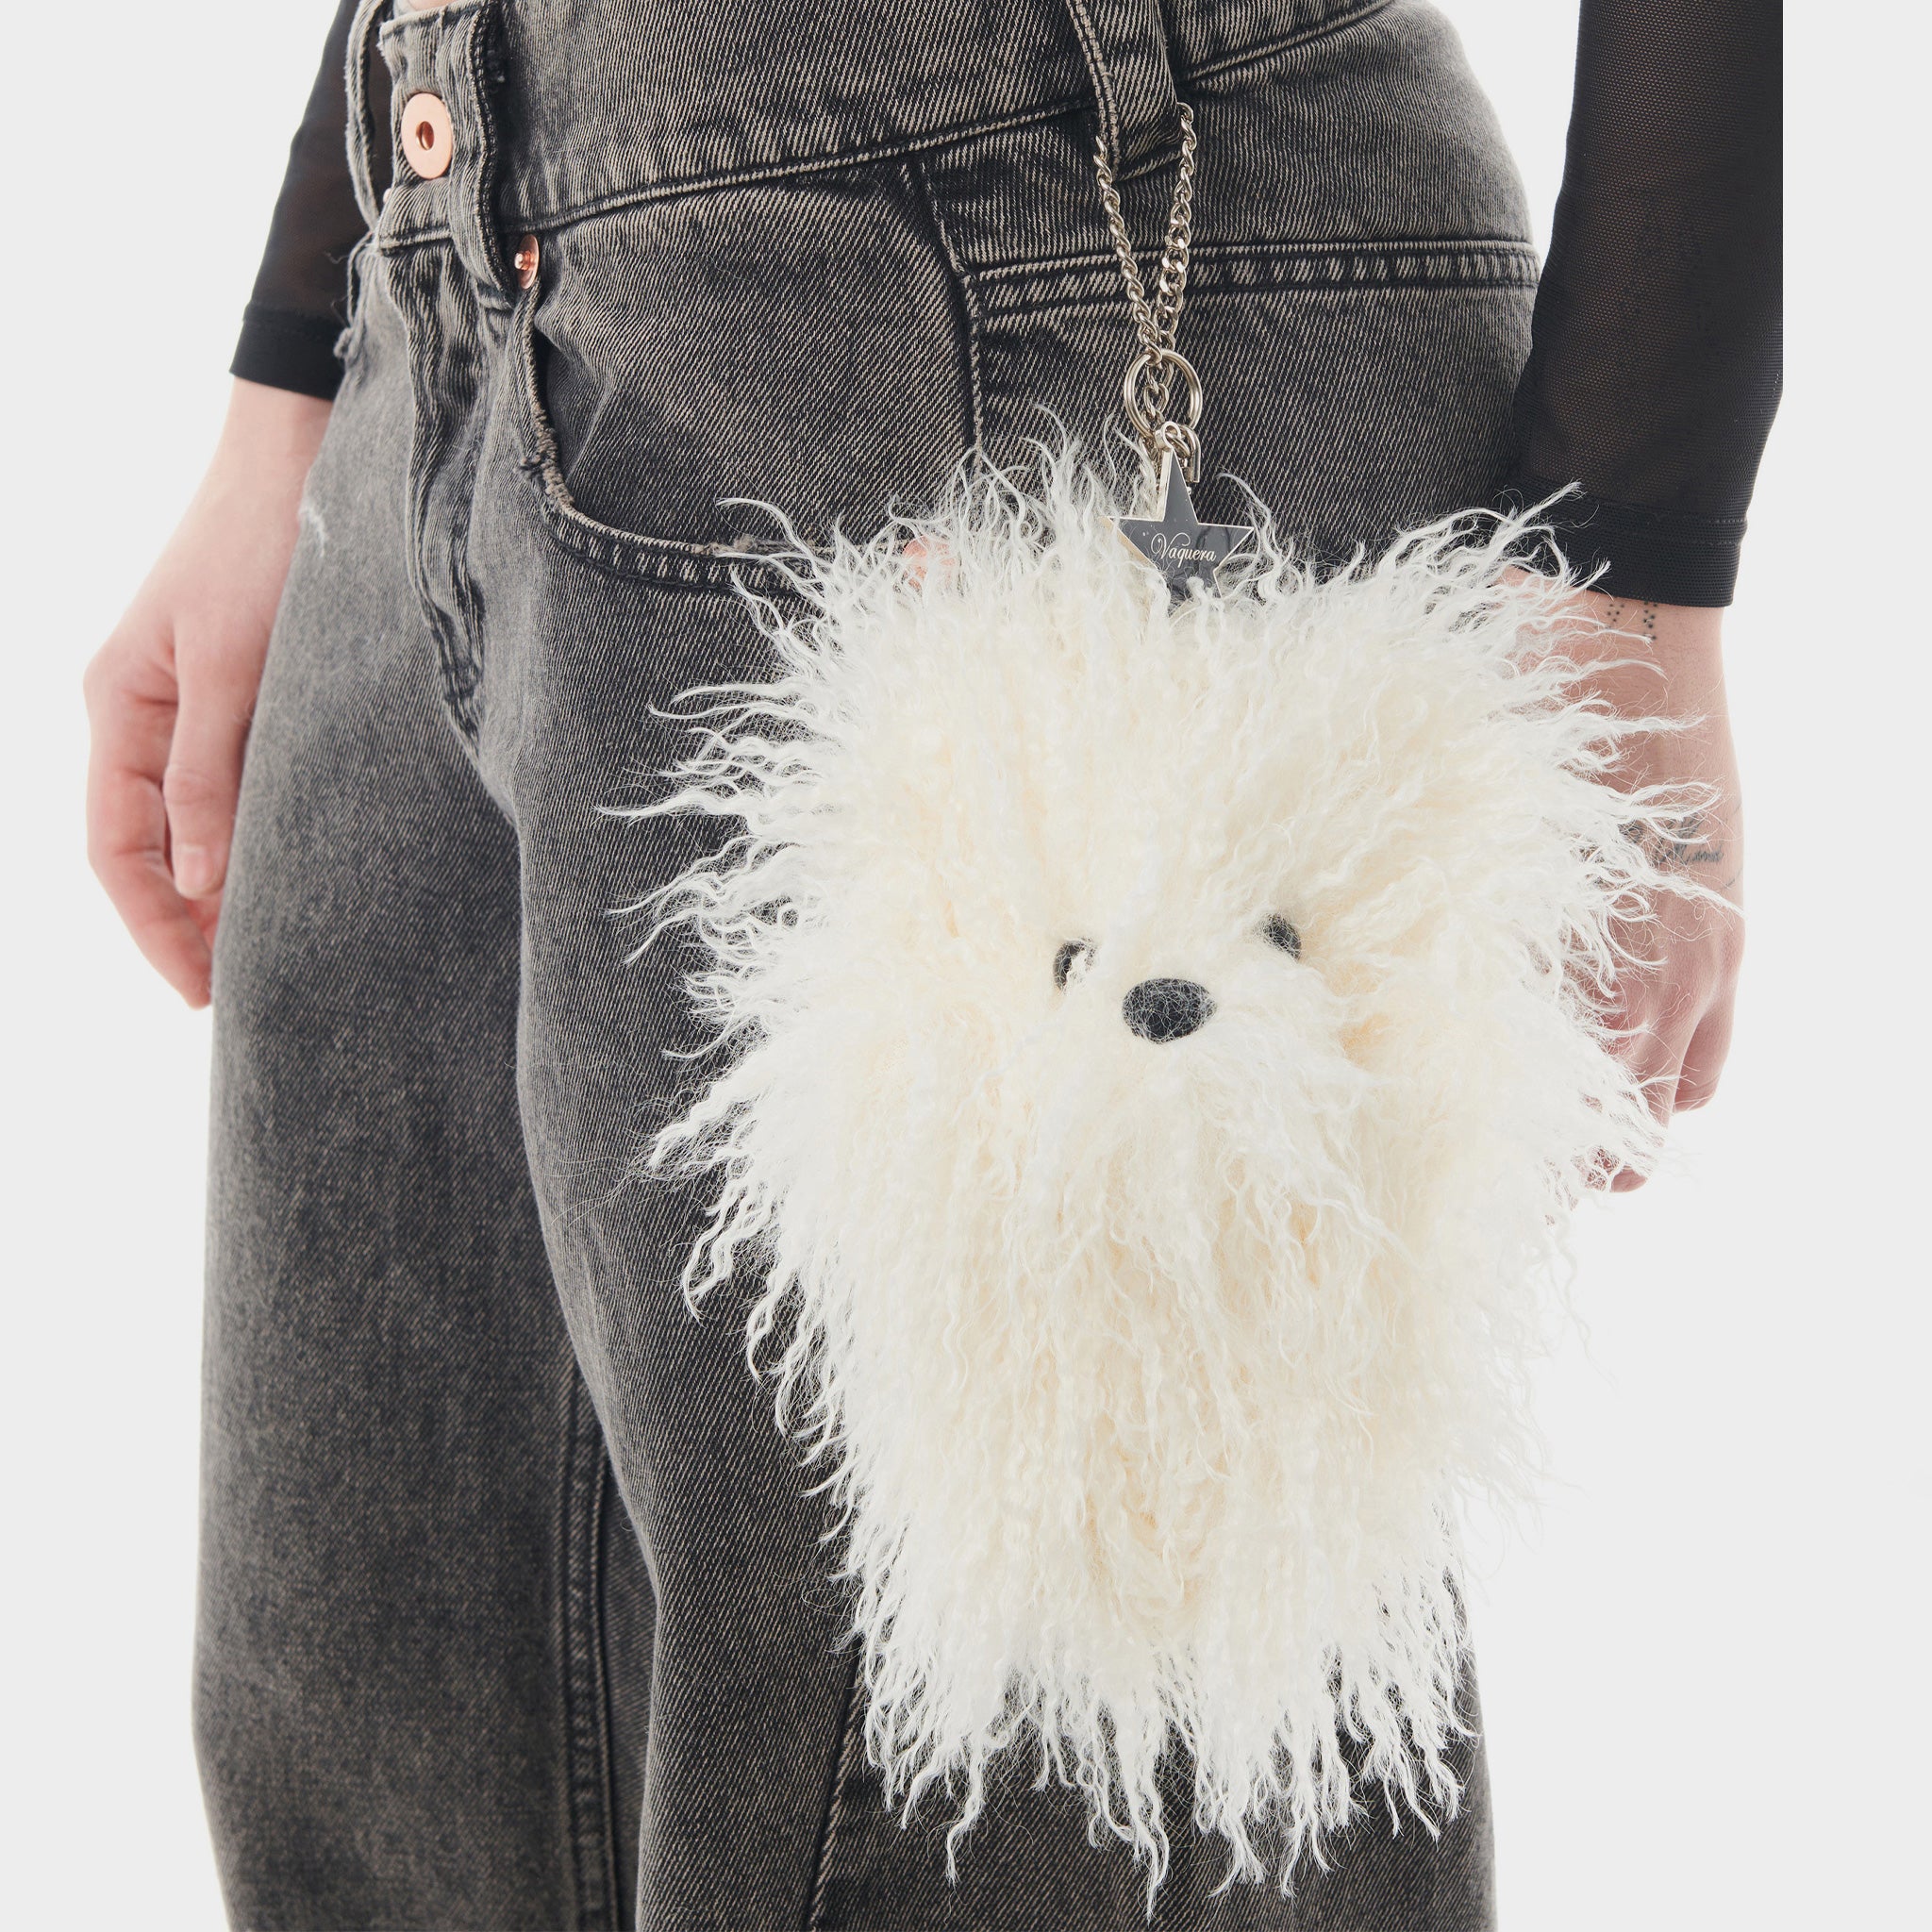 Side detail of model wearing the Furry Teddy Keychain - a large stuffed white teddy bear dangling off a silver keychain, attached to the belt loop of a model wearing black jeans.